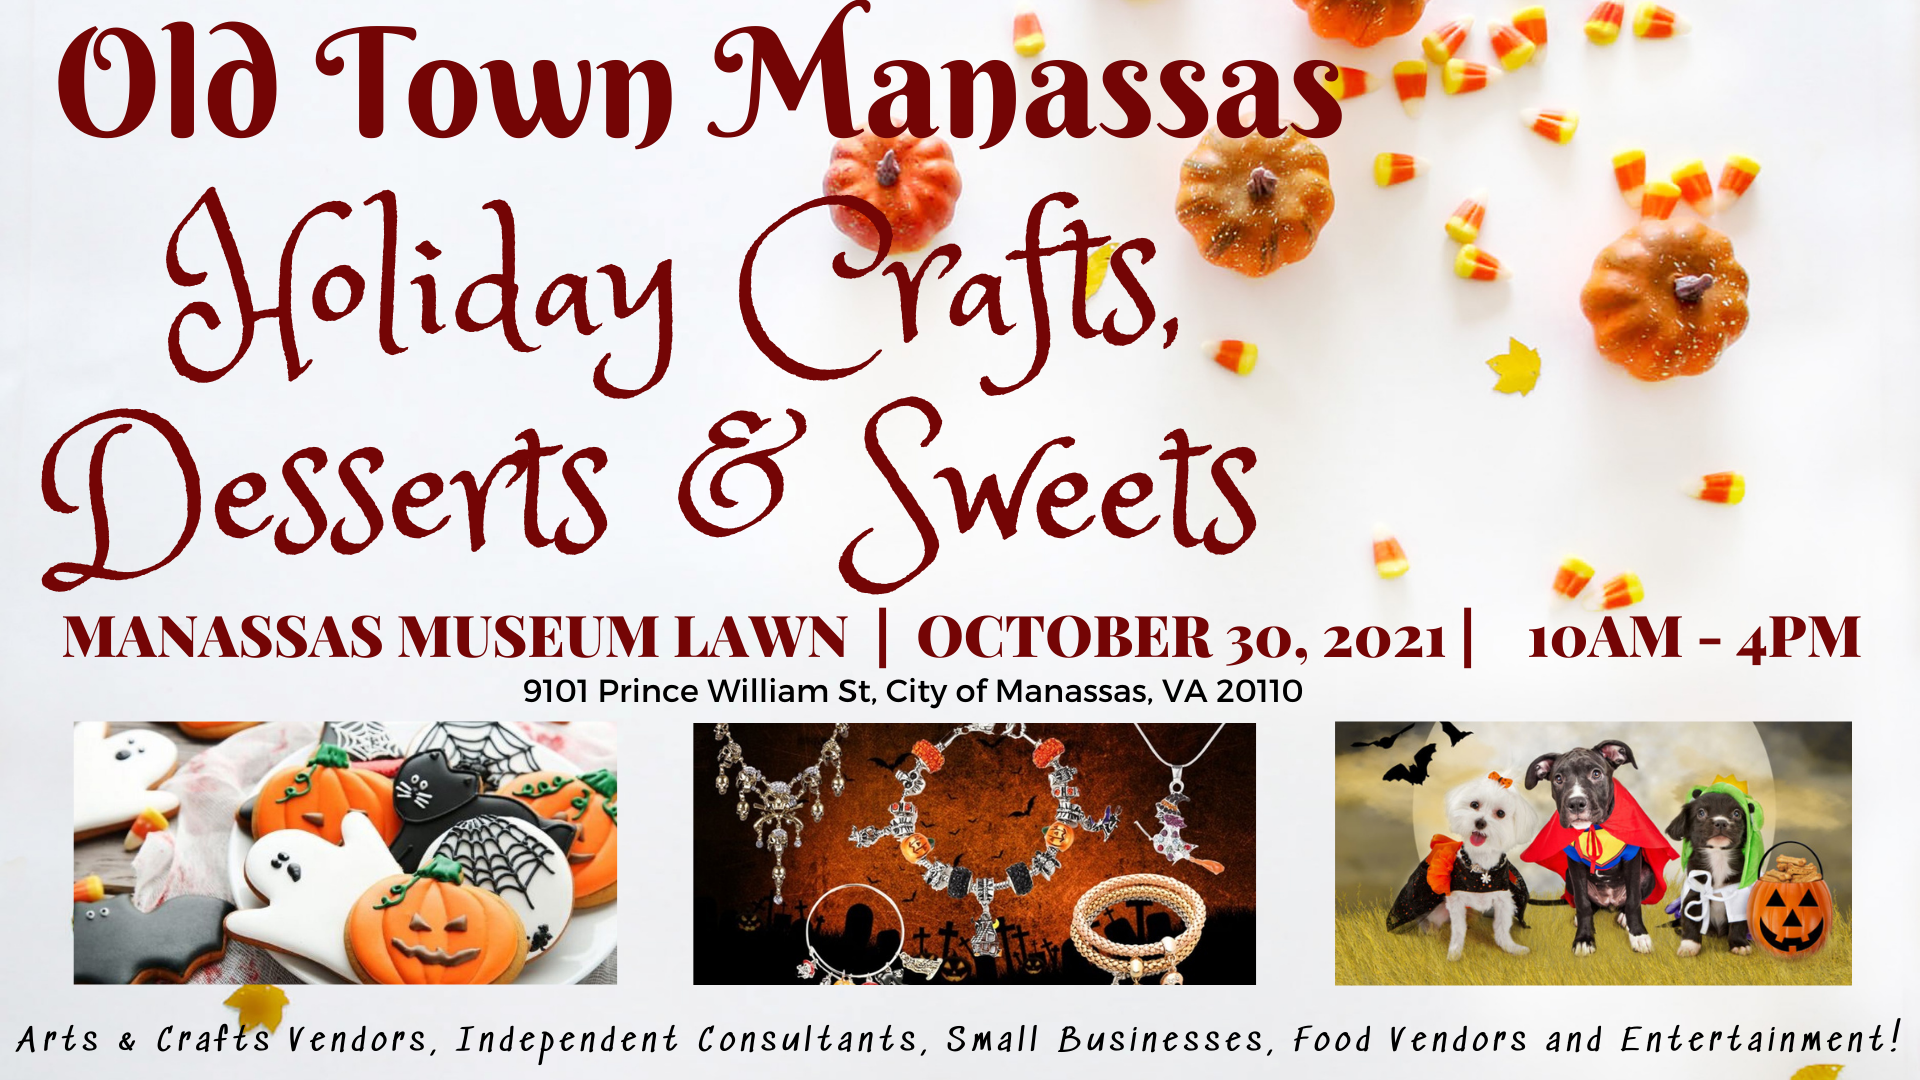 Old Town Manassas
Holiday crafts, Desserts &Sweets
